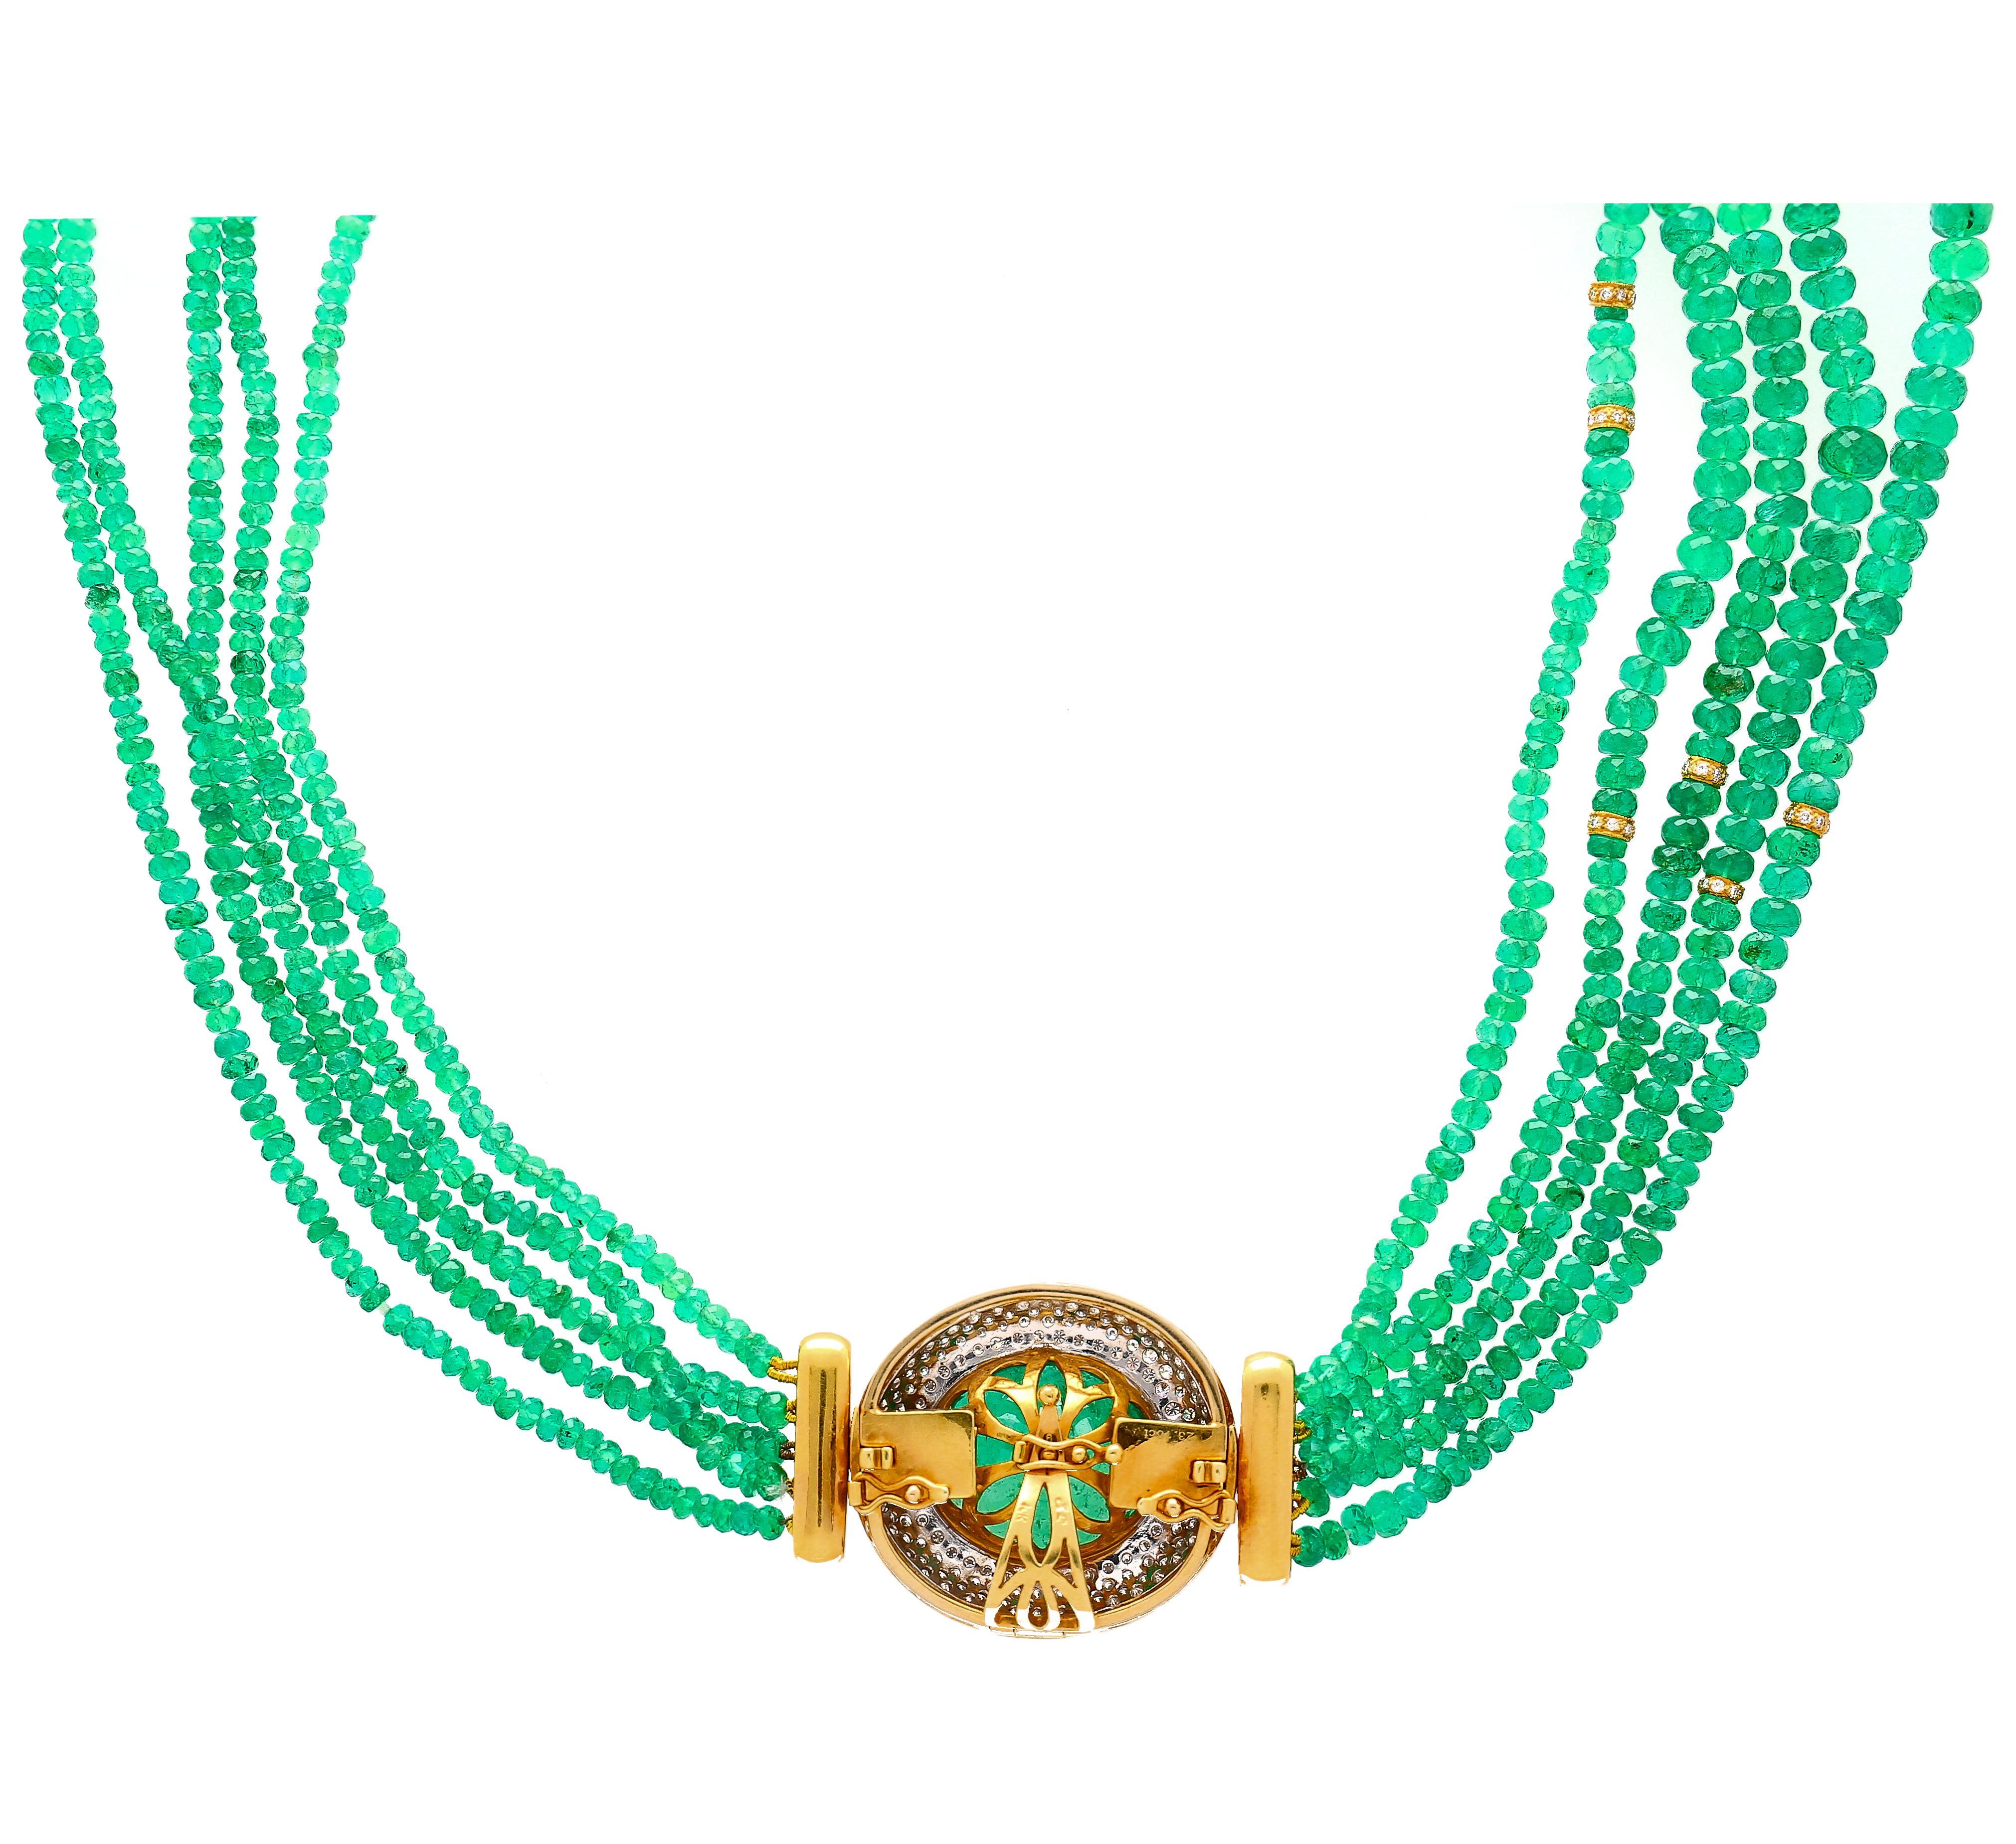 Vintage retro-style oval cut emerald and diamond bead necklace. Set in 18k yellow gold. The necklace features 234 oval cut diamonds, and 3.5mm (approx.) emerald beads that form 22 inches of luxury necklace. The emerald center stone features a